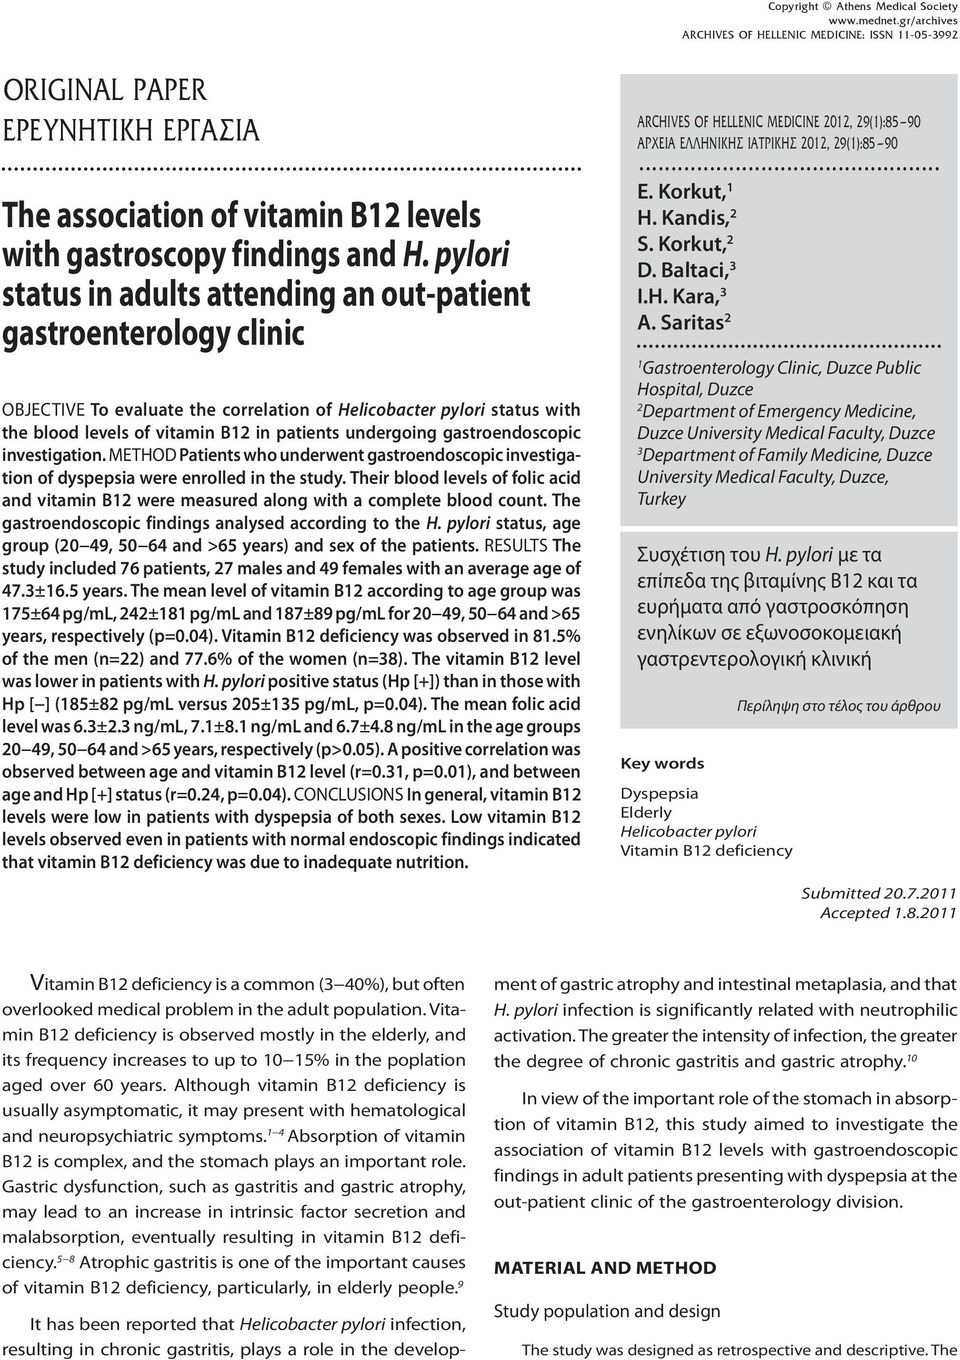 undergoing gastroendoscopic investigation. METHOD Patients who underwent gastroendoscopic investigation of dyspepsia were enrolled in the study.